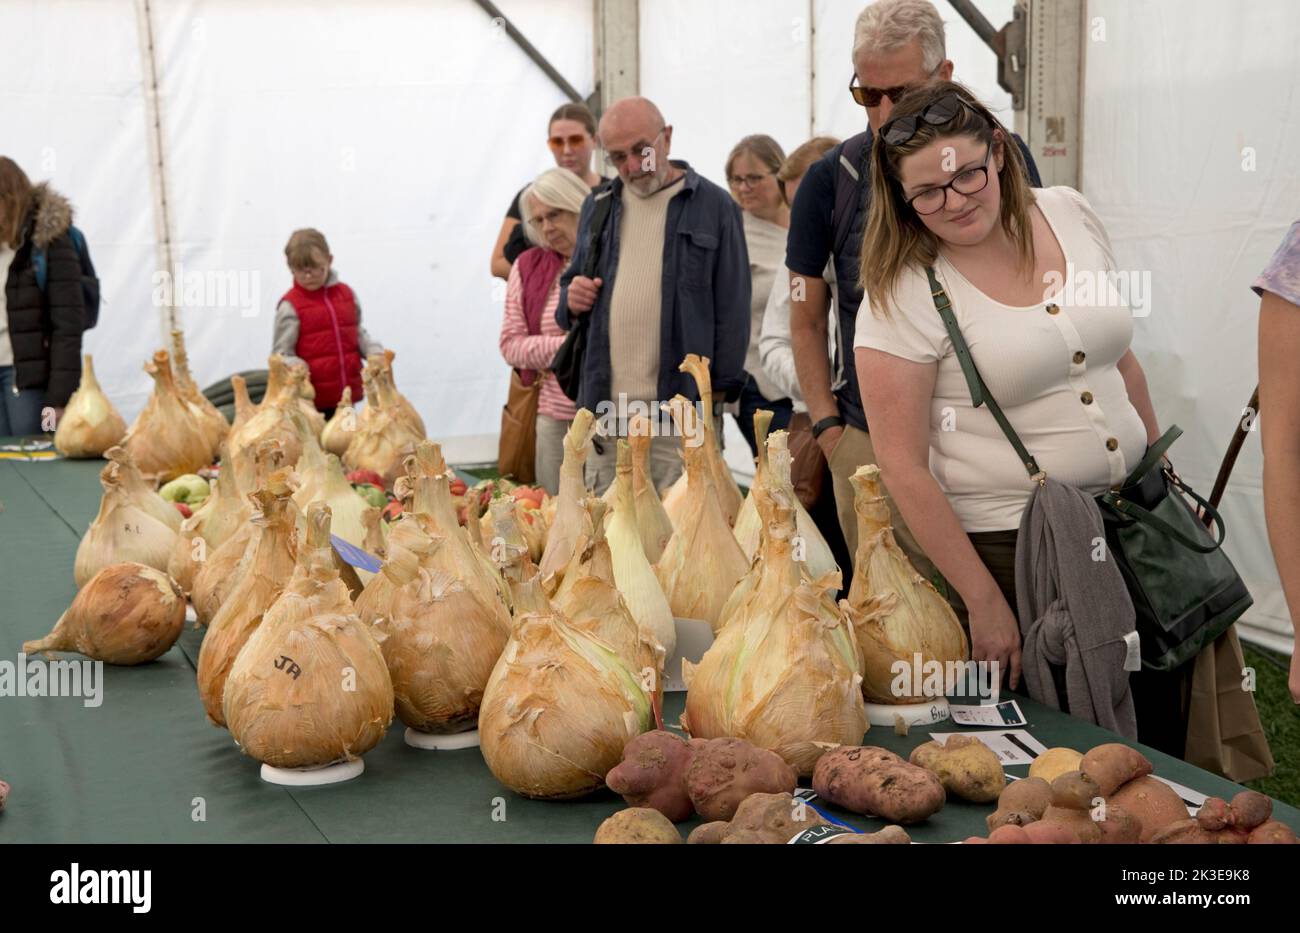 Visitors looking at giant onions some of the giant vegetables at Three Counties Autumn Show  Great Malvern, UK Stock Photo